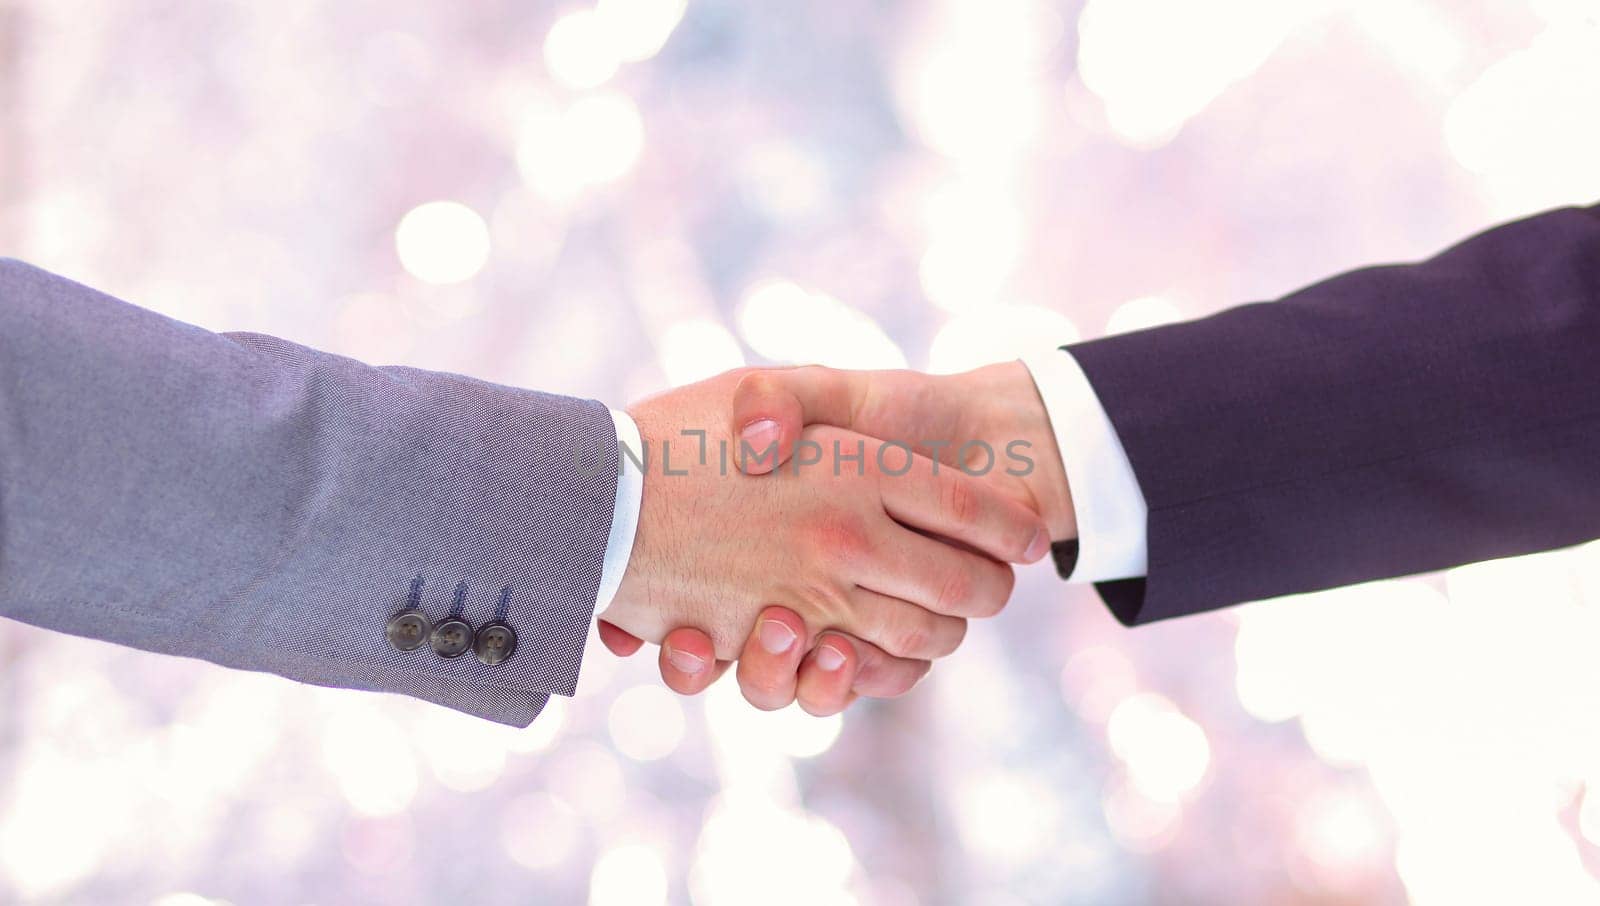 Clouse-up of businessman and businesswoman shaking hands.